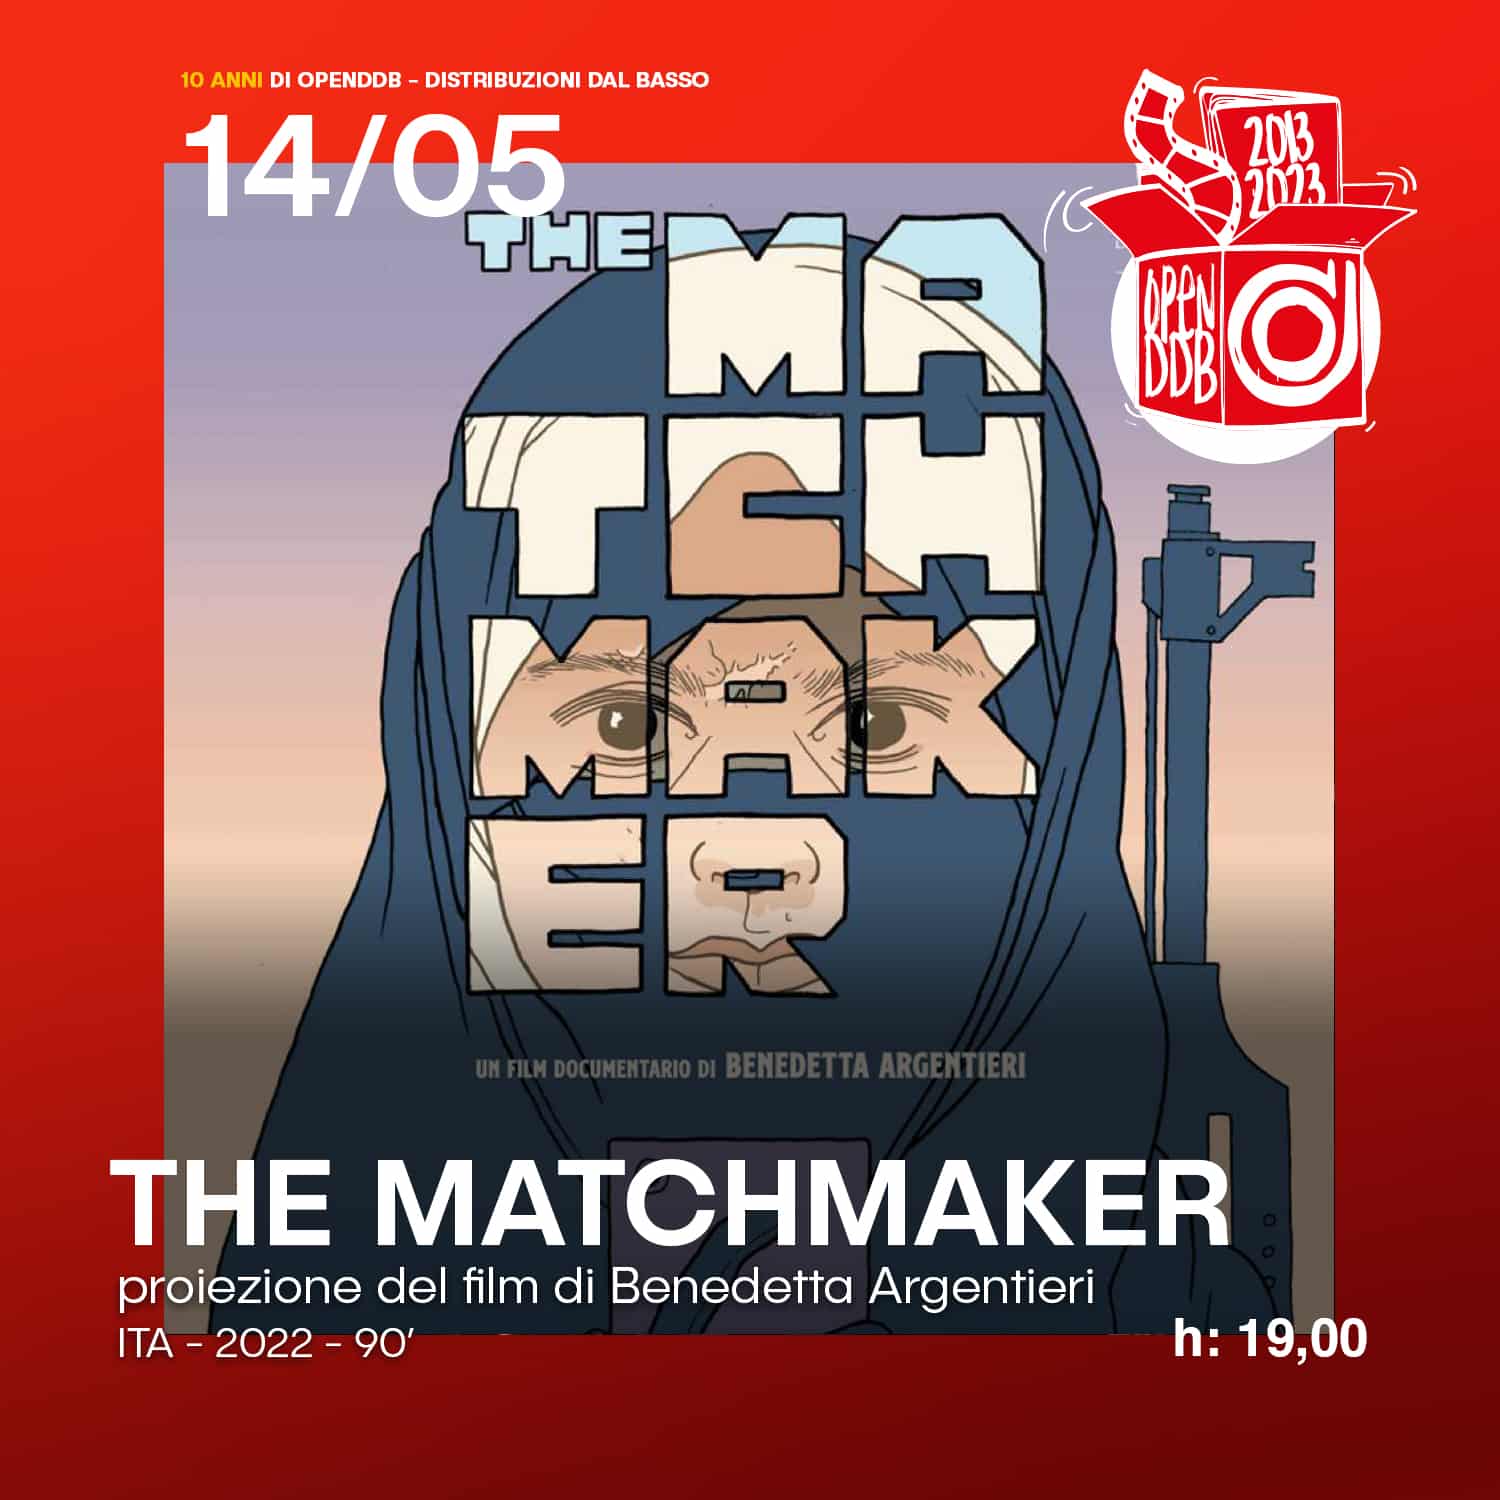 OPENDDB The Matchmaker post